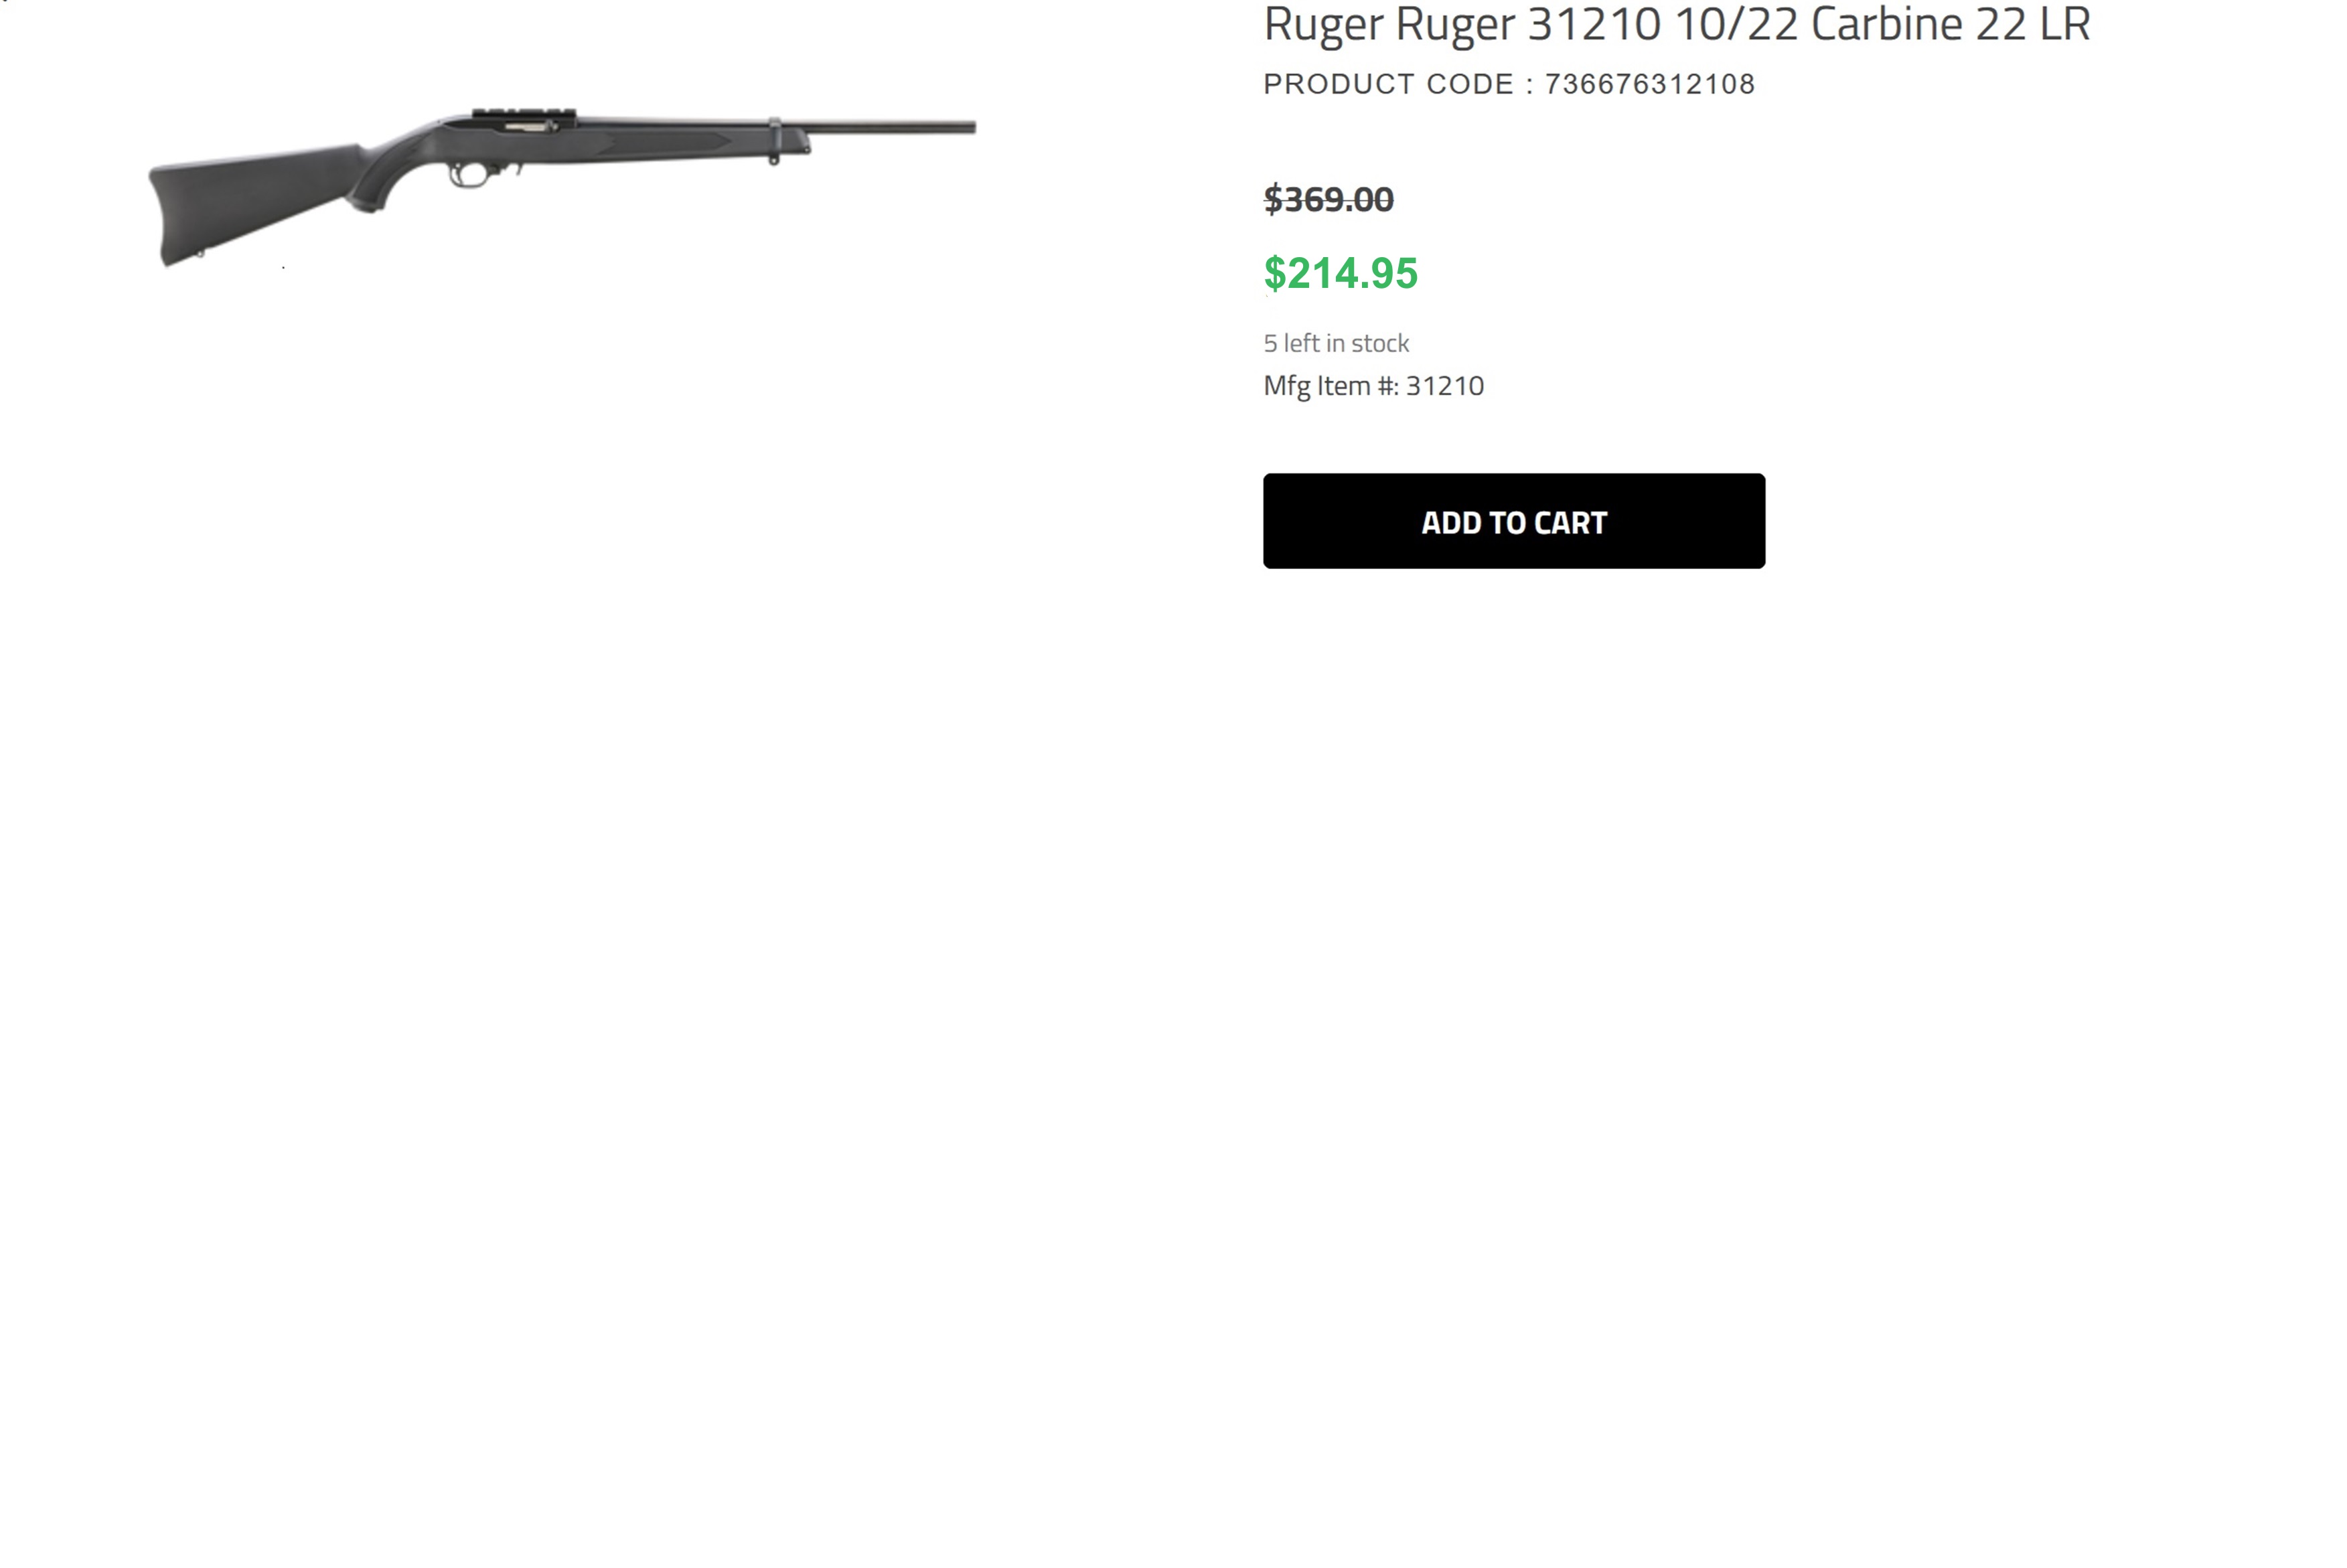 https://www.argunsammo.com/products/rifles-ruger-31210-736676312108-4106